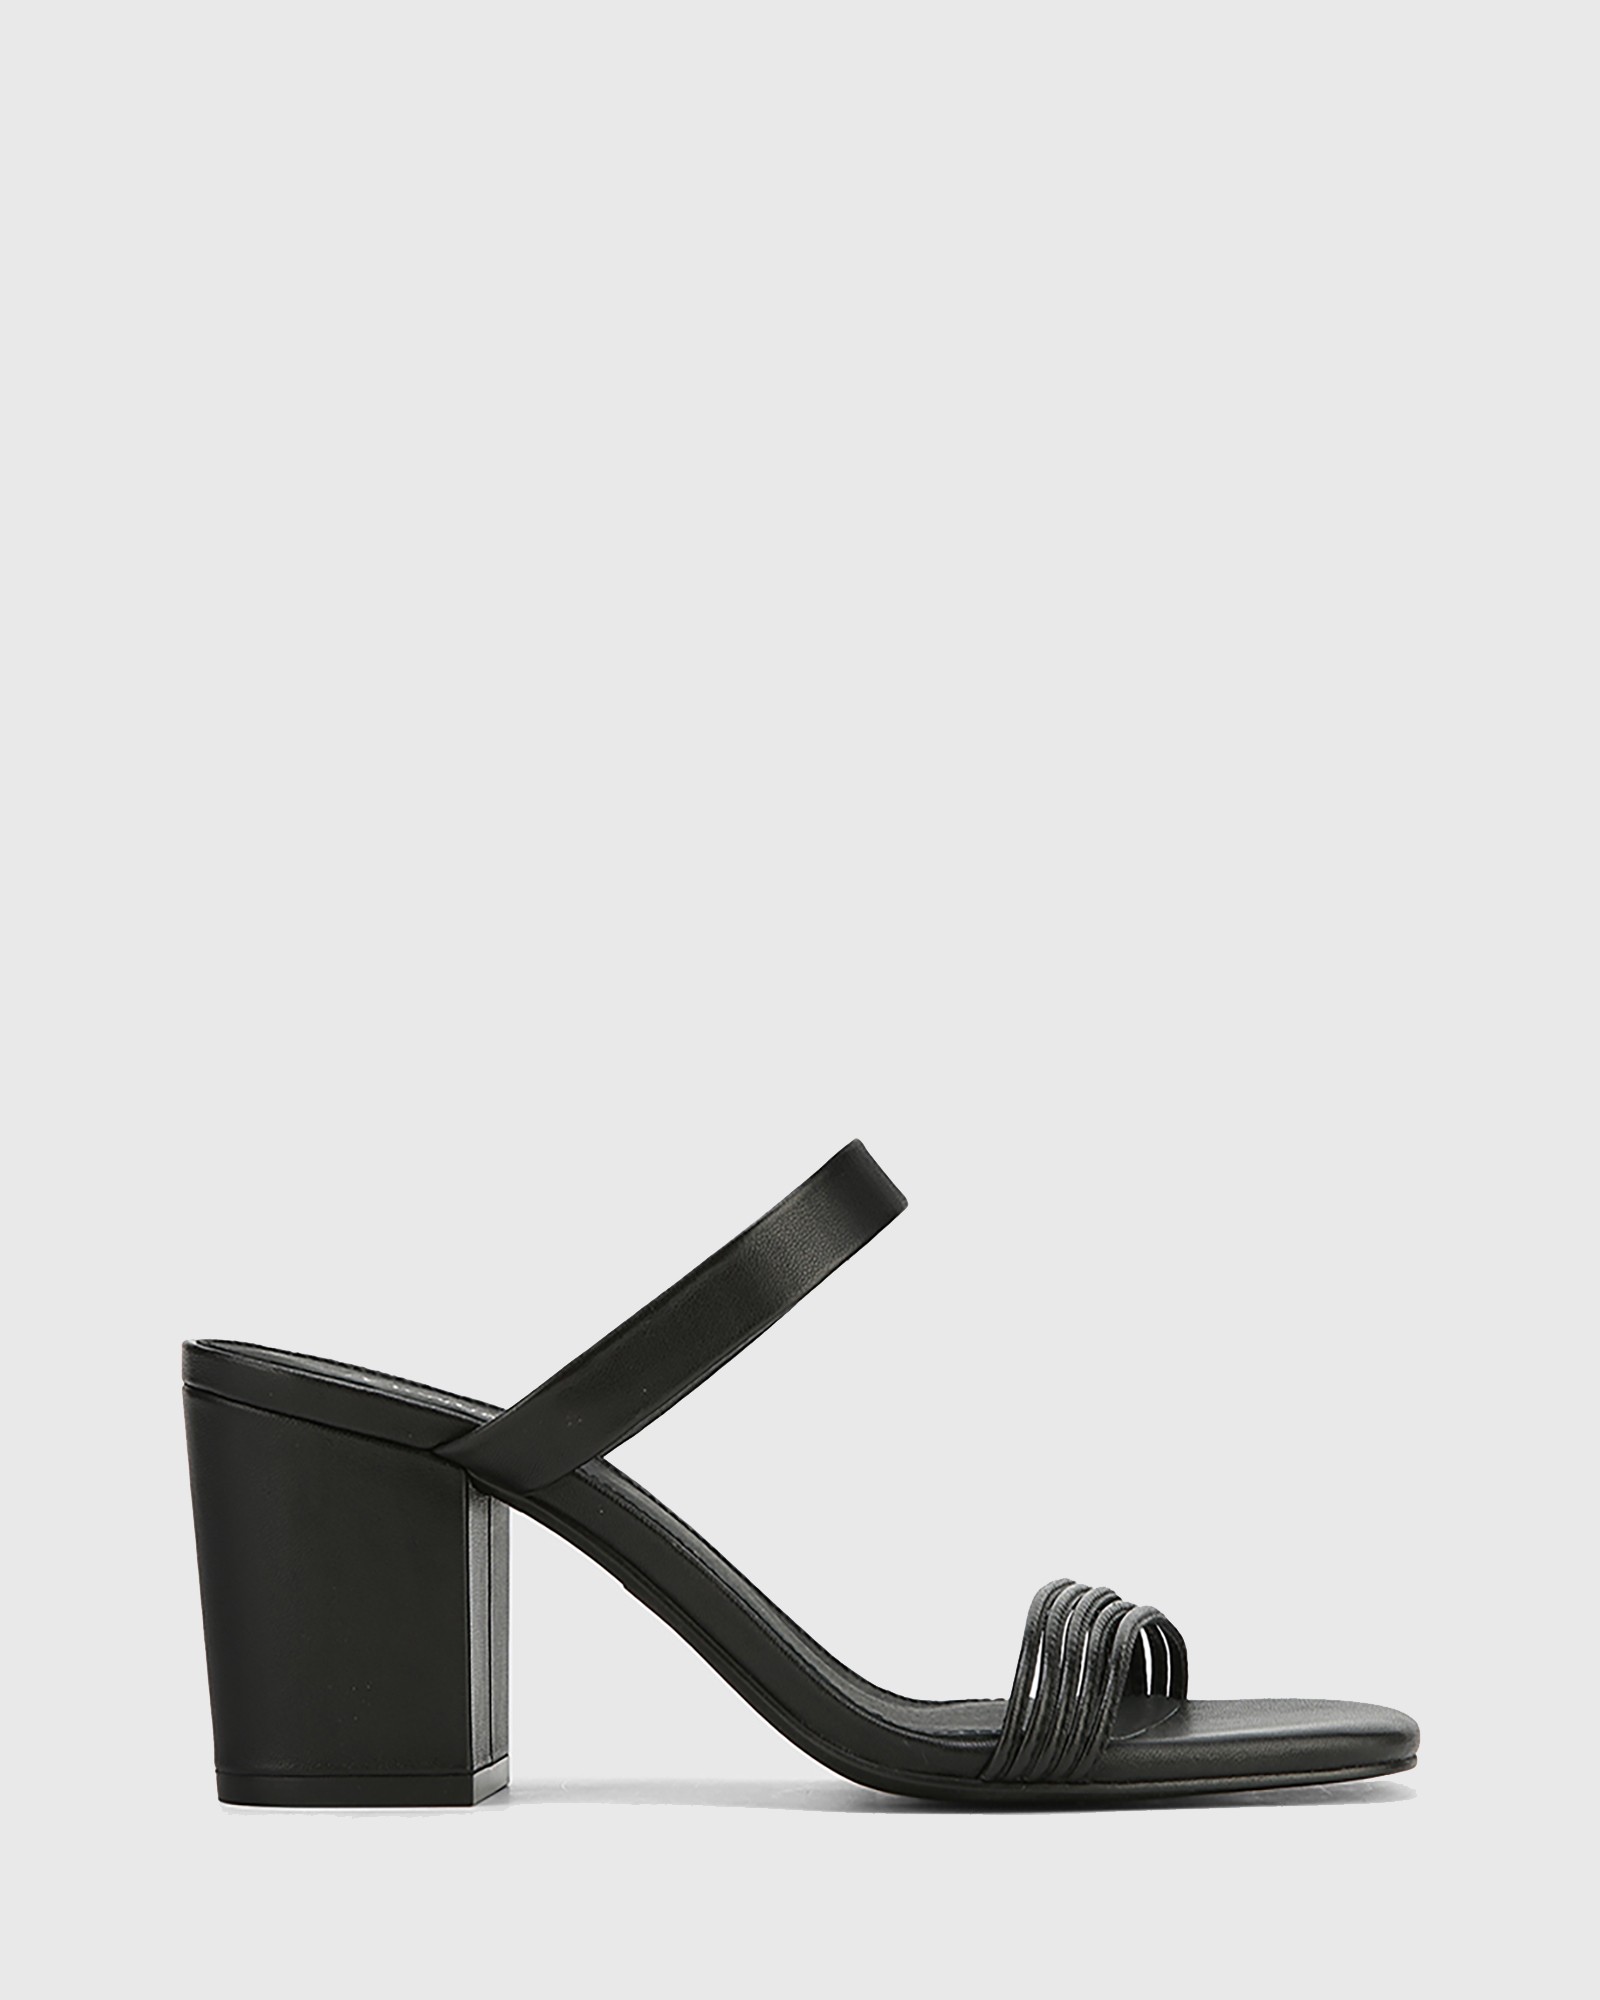 Christiano Leather Slip On Block Heel Sandals Black by Wittner | ShoeSales